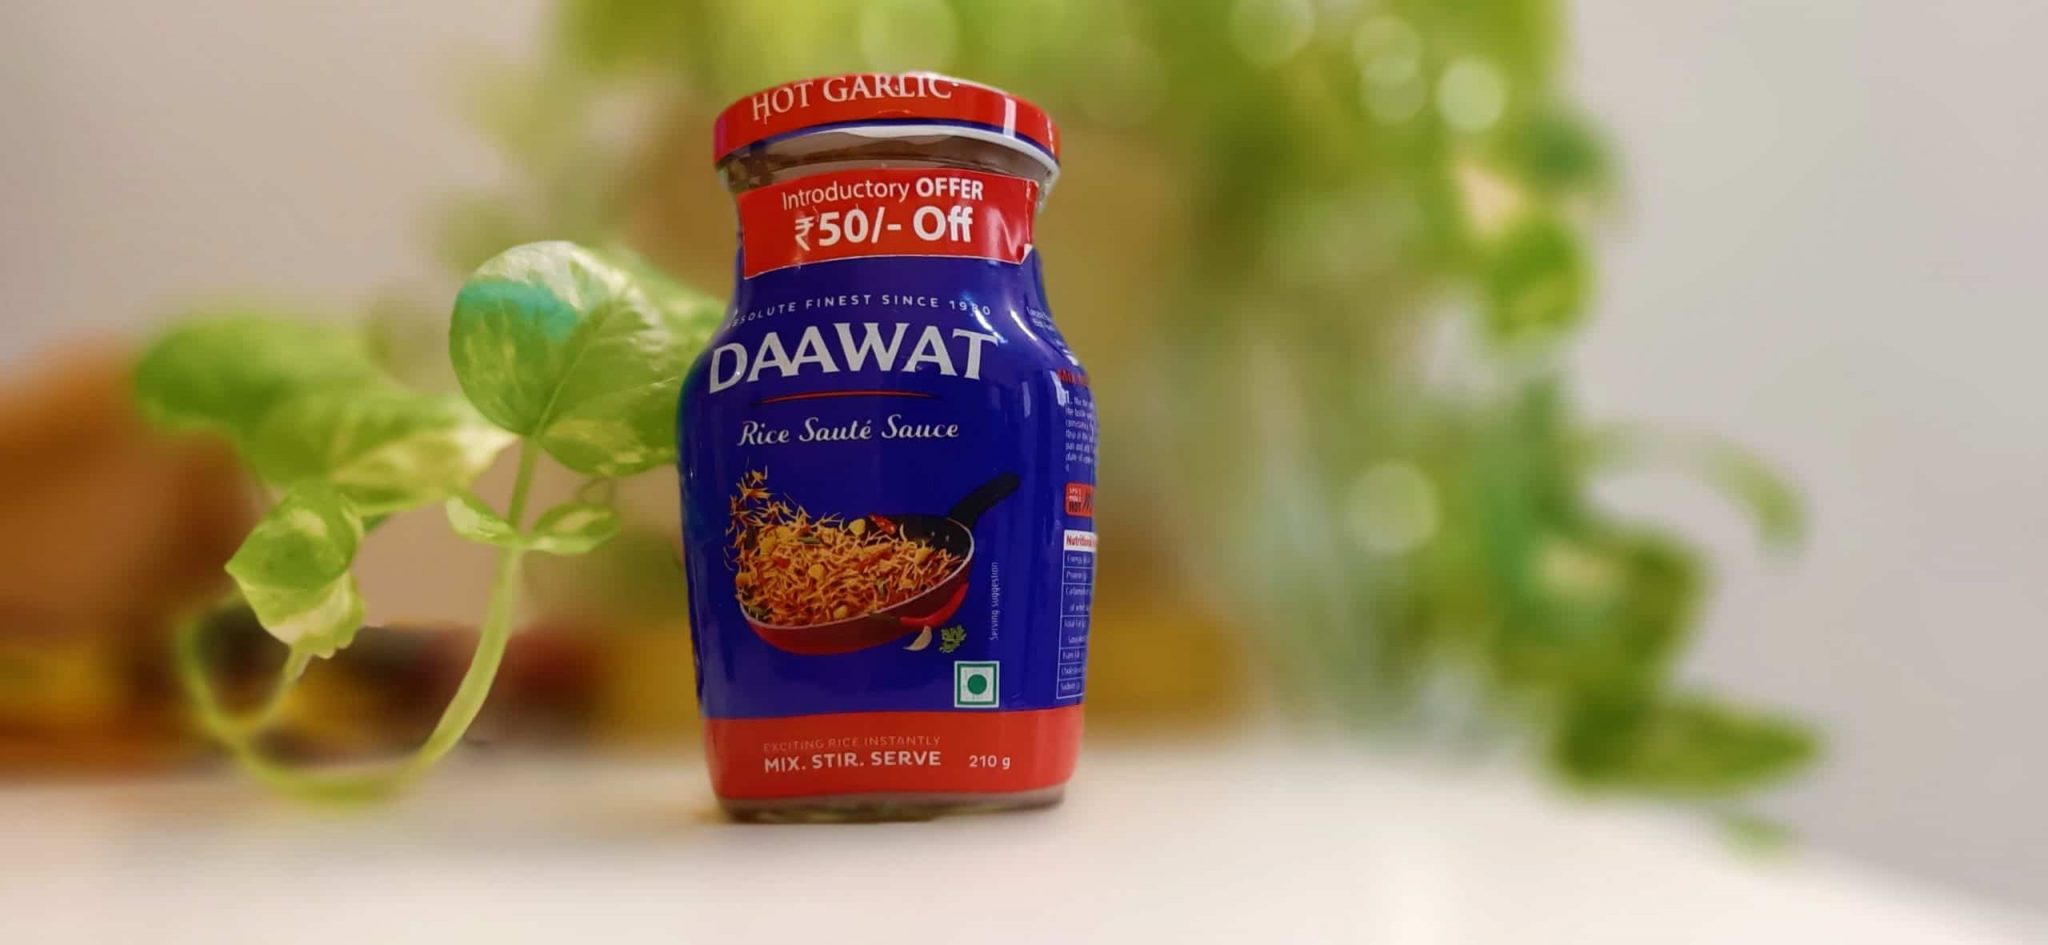 FIrst impressions of daawat's rice saute sauce